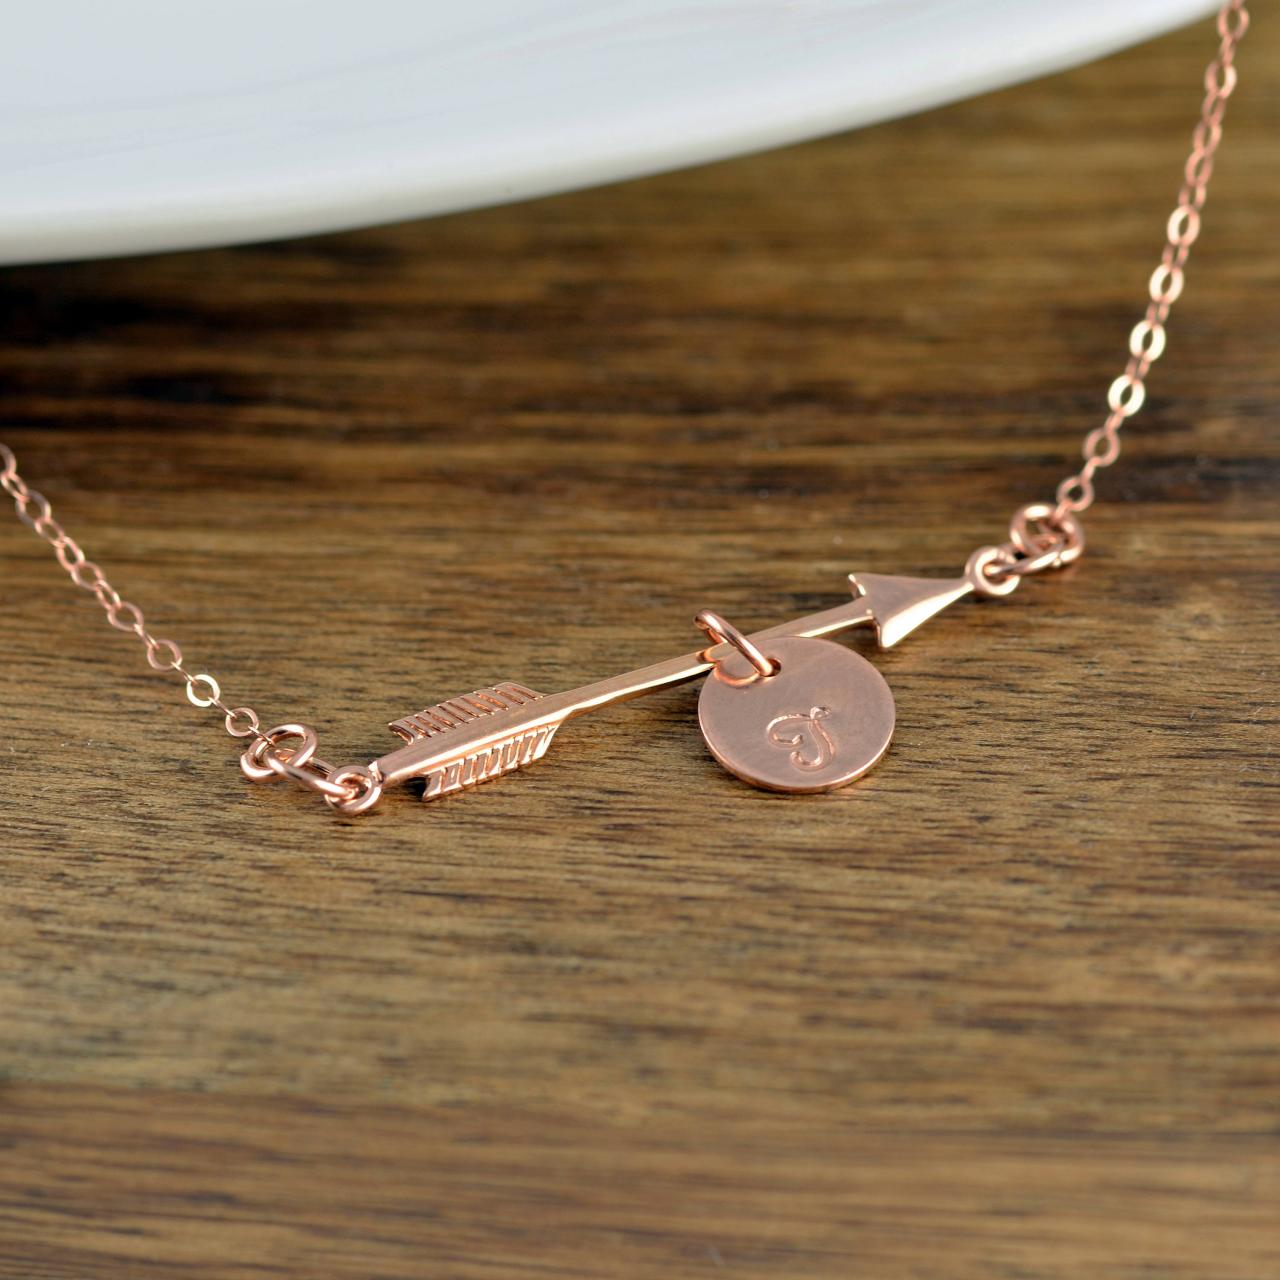 Personalized Arrow Necklace - Rose Gold Initial Necklace - Initial Jewelry - Arrow Necklace - Arrow Jewelry - Rose Gold Arrow Necklace